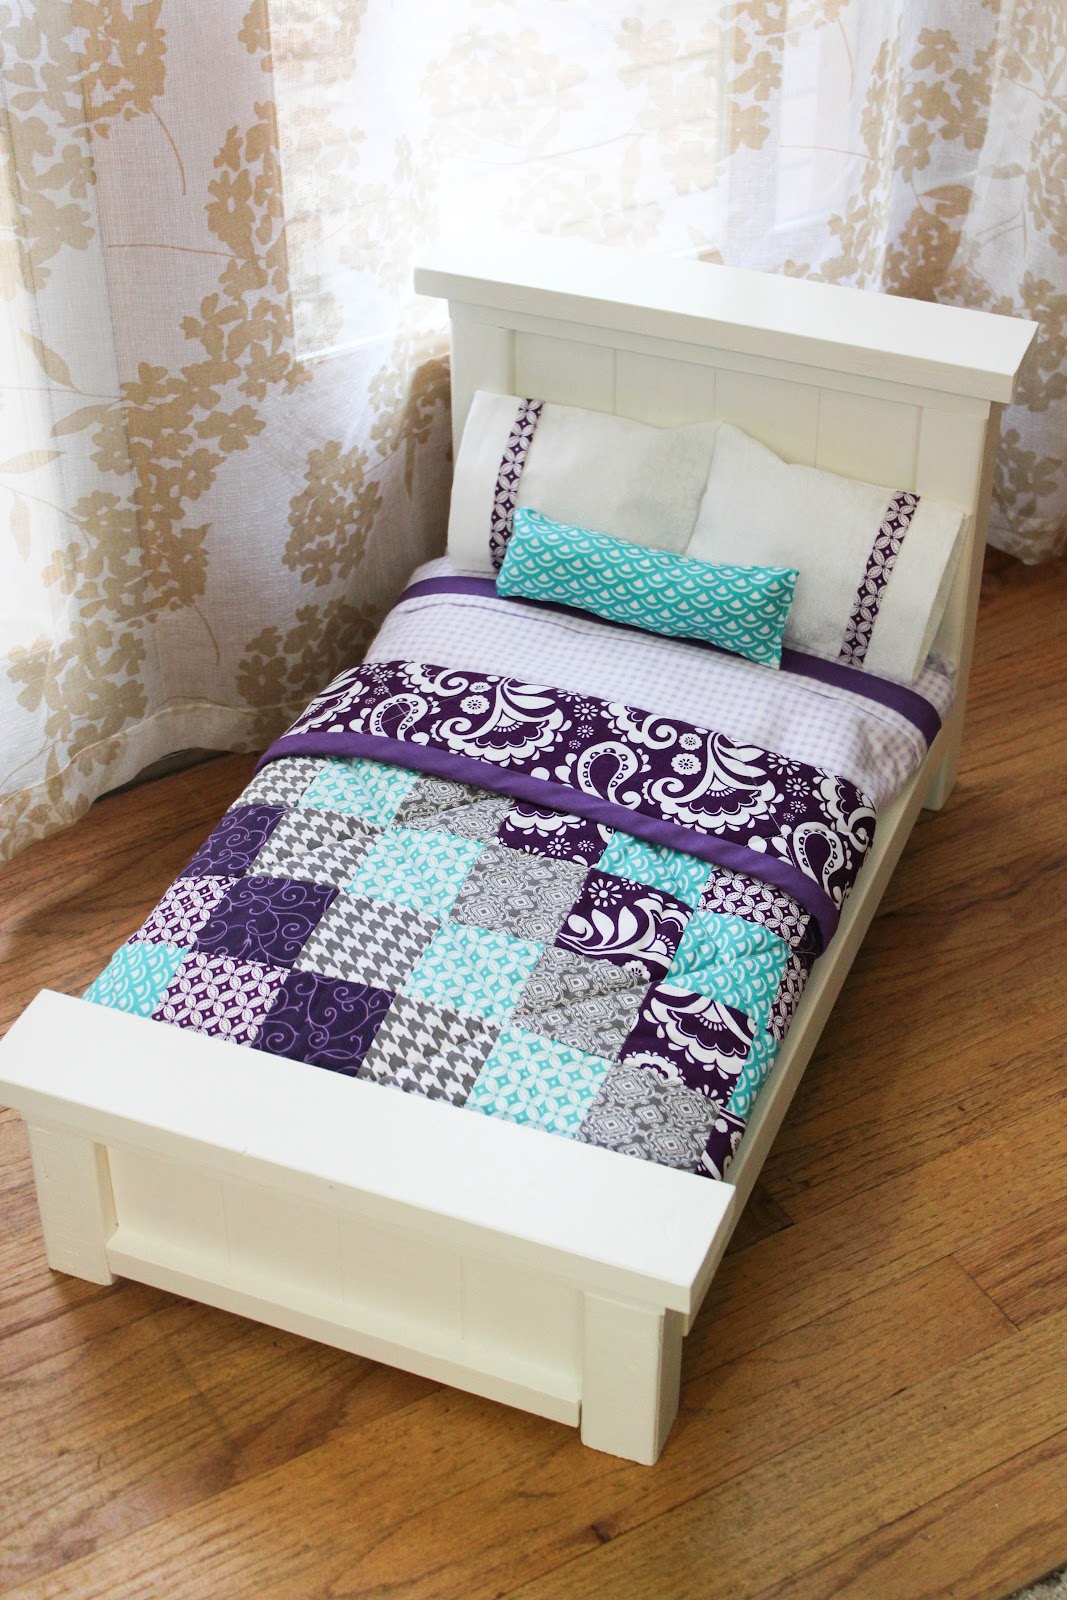 DIY Doll Beds and Tiny Quilts BlogHer